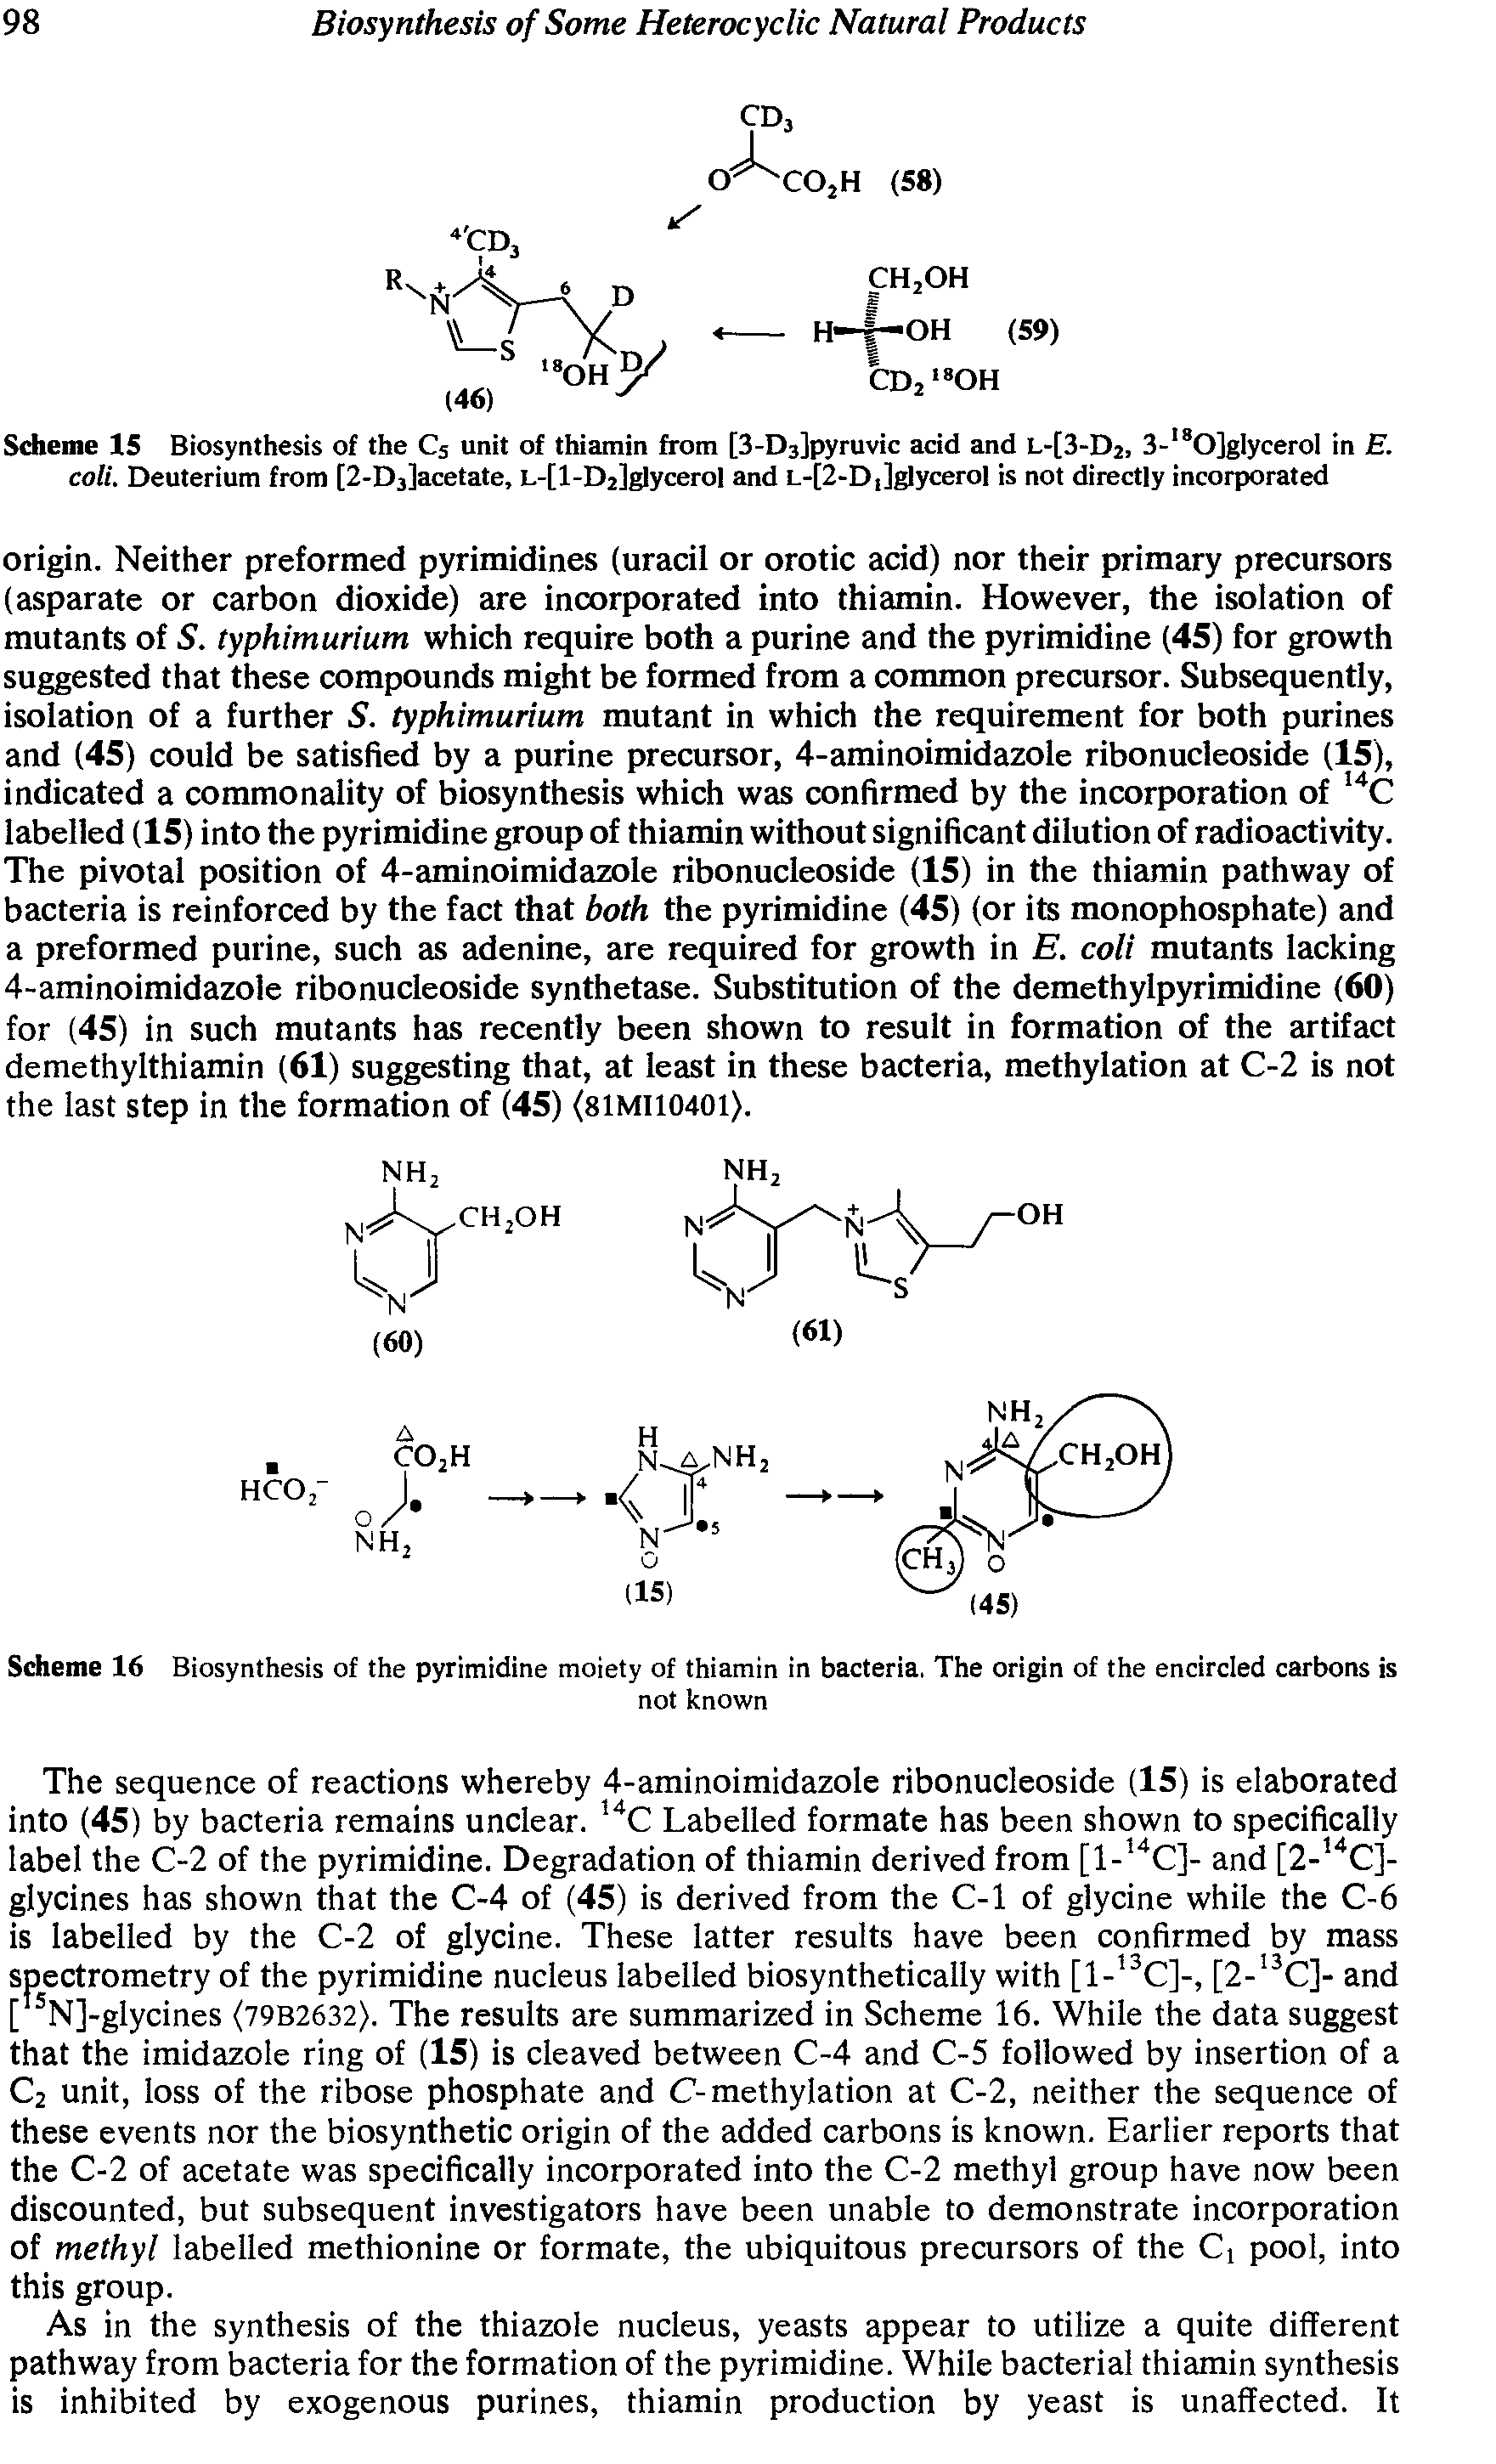 Scheme IS Biosynthesis of the C5 unit of thiamin from [3-D3]pyruvic acid and l-[3-D2, 3- sO]gIyceroI in E. coli. Deuterium from [2-D3]acetate, L-[l-D2]glycerol and L-[2-Di]glycerol is not directly incorporated...